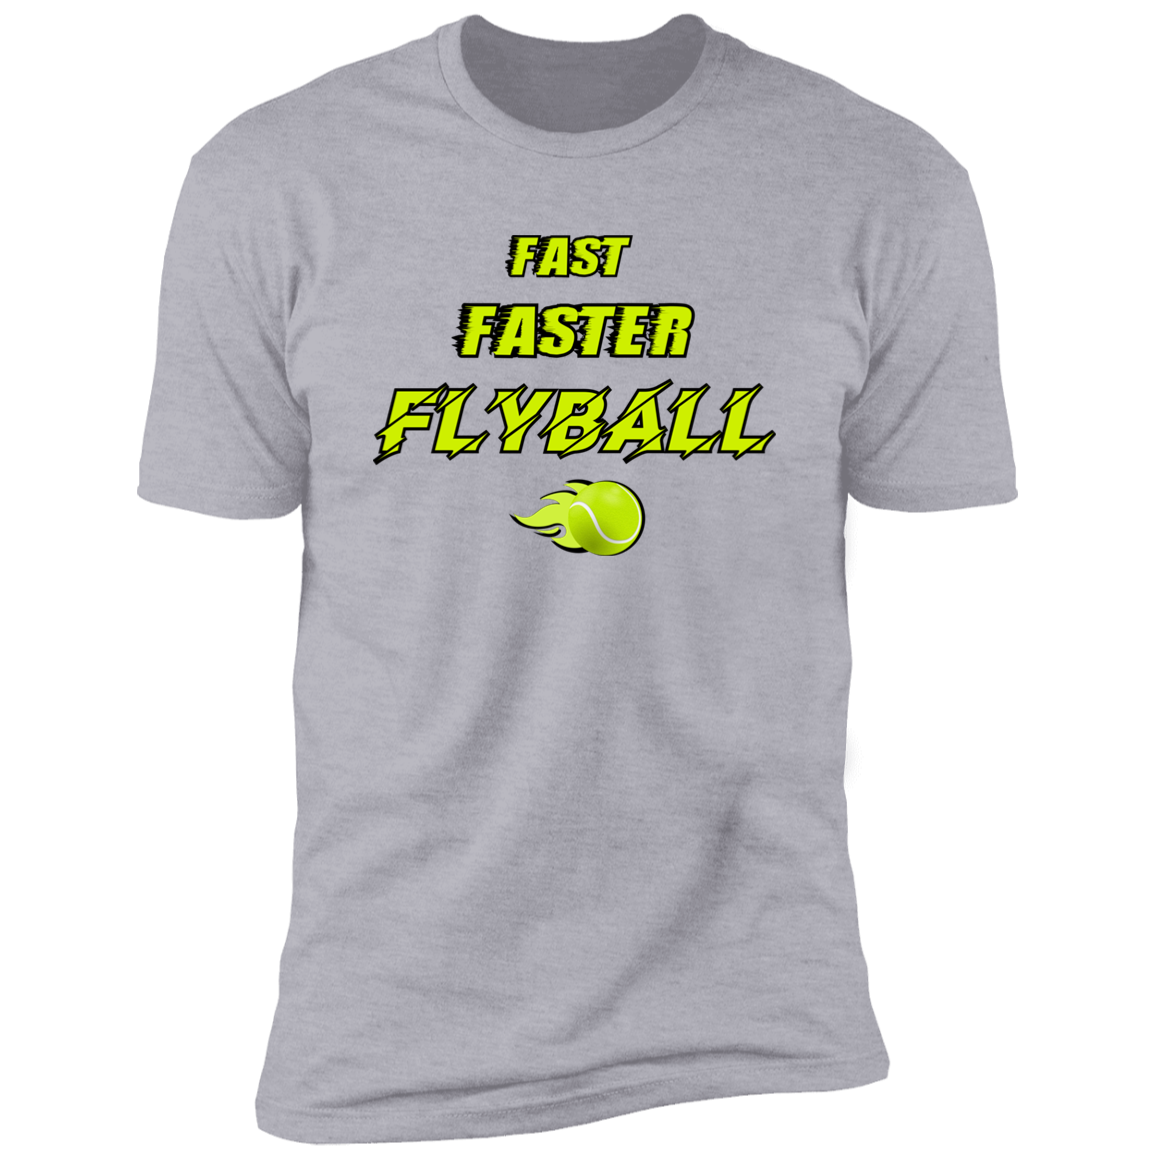 Fast Faster Flyball Dog T-shirt, sporting dog t-shirt, flyball t-shirt, in light heather gray